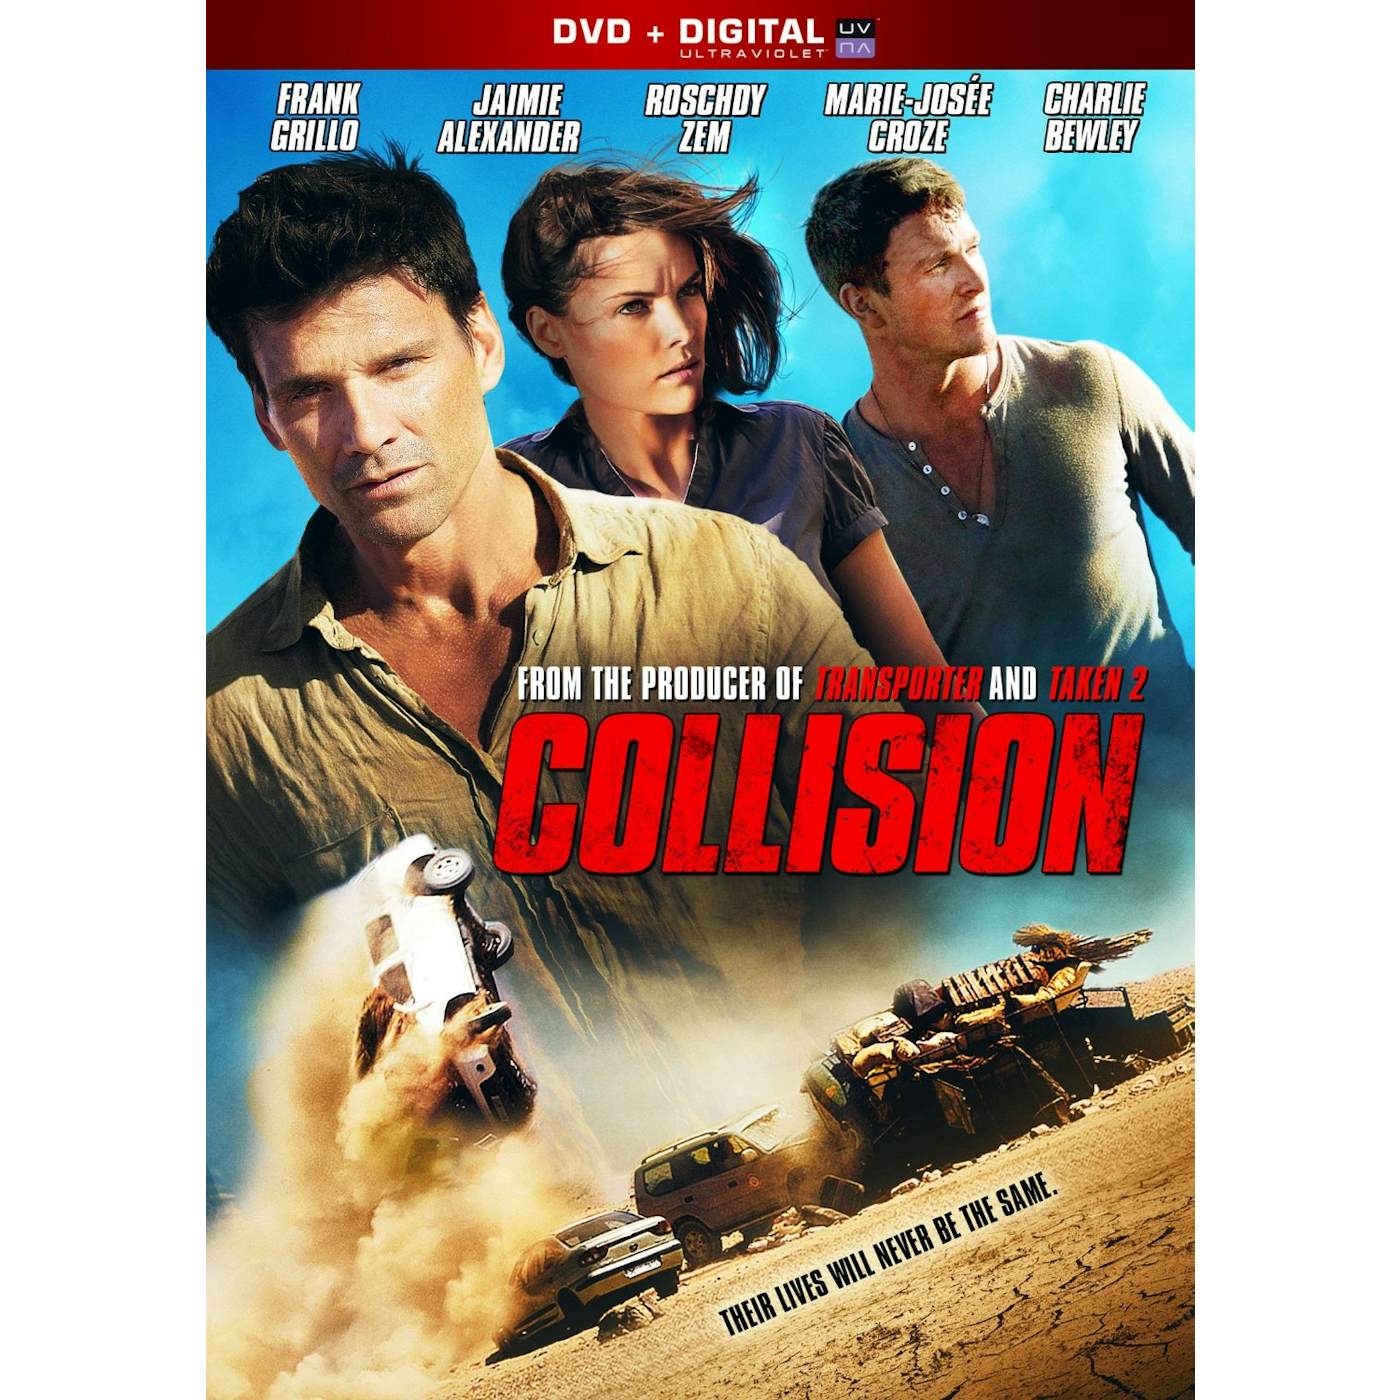 The Collision DVD